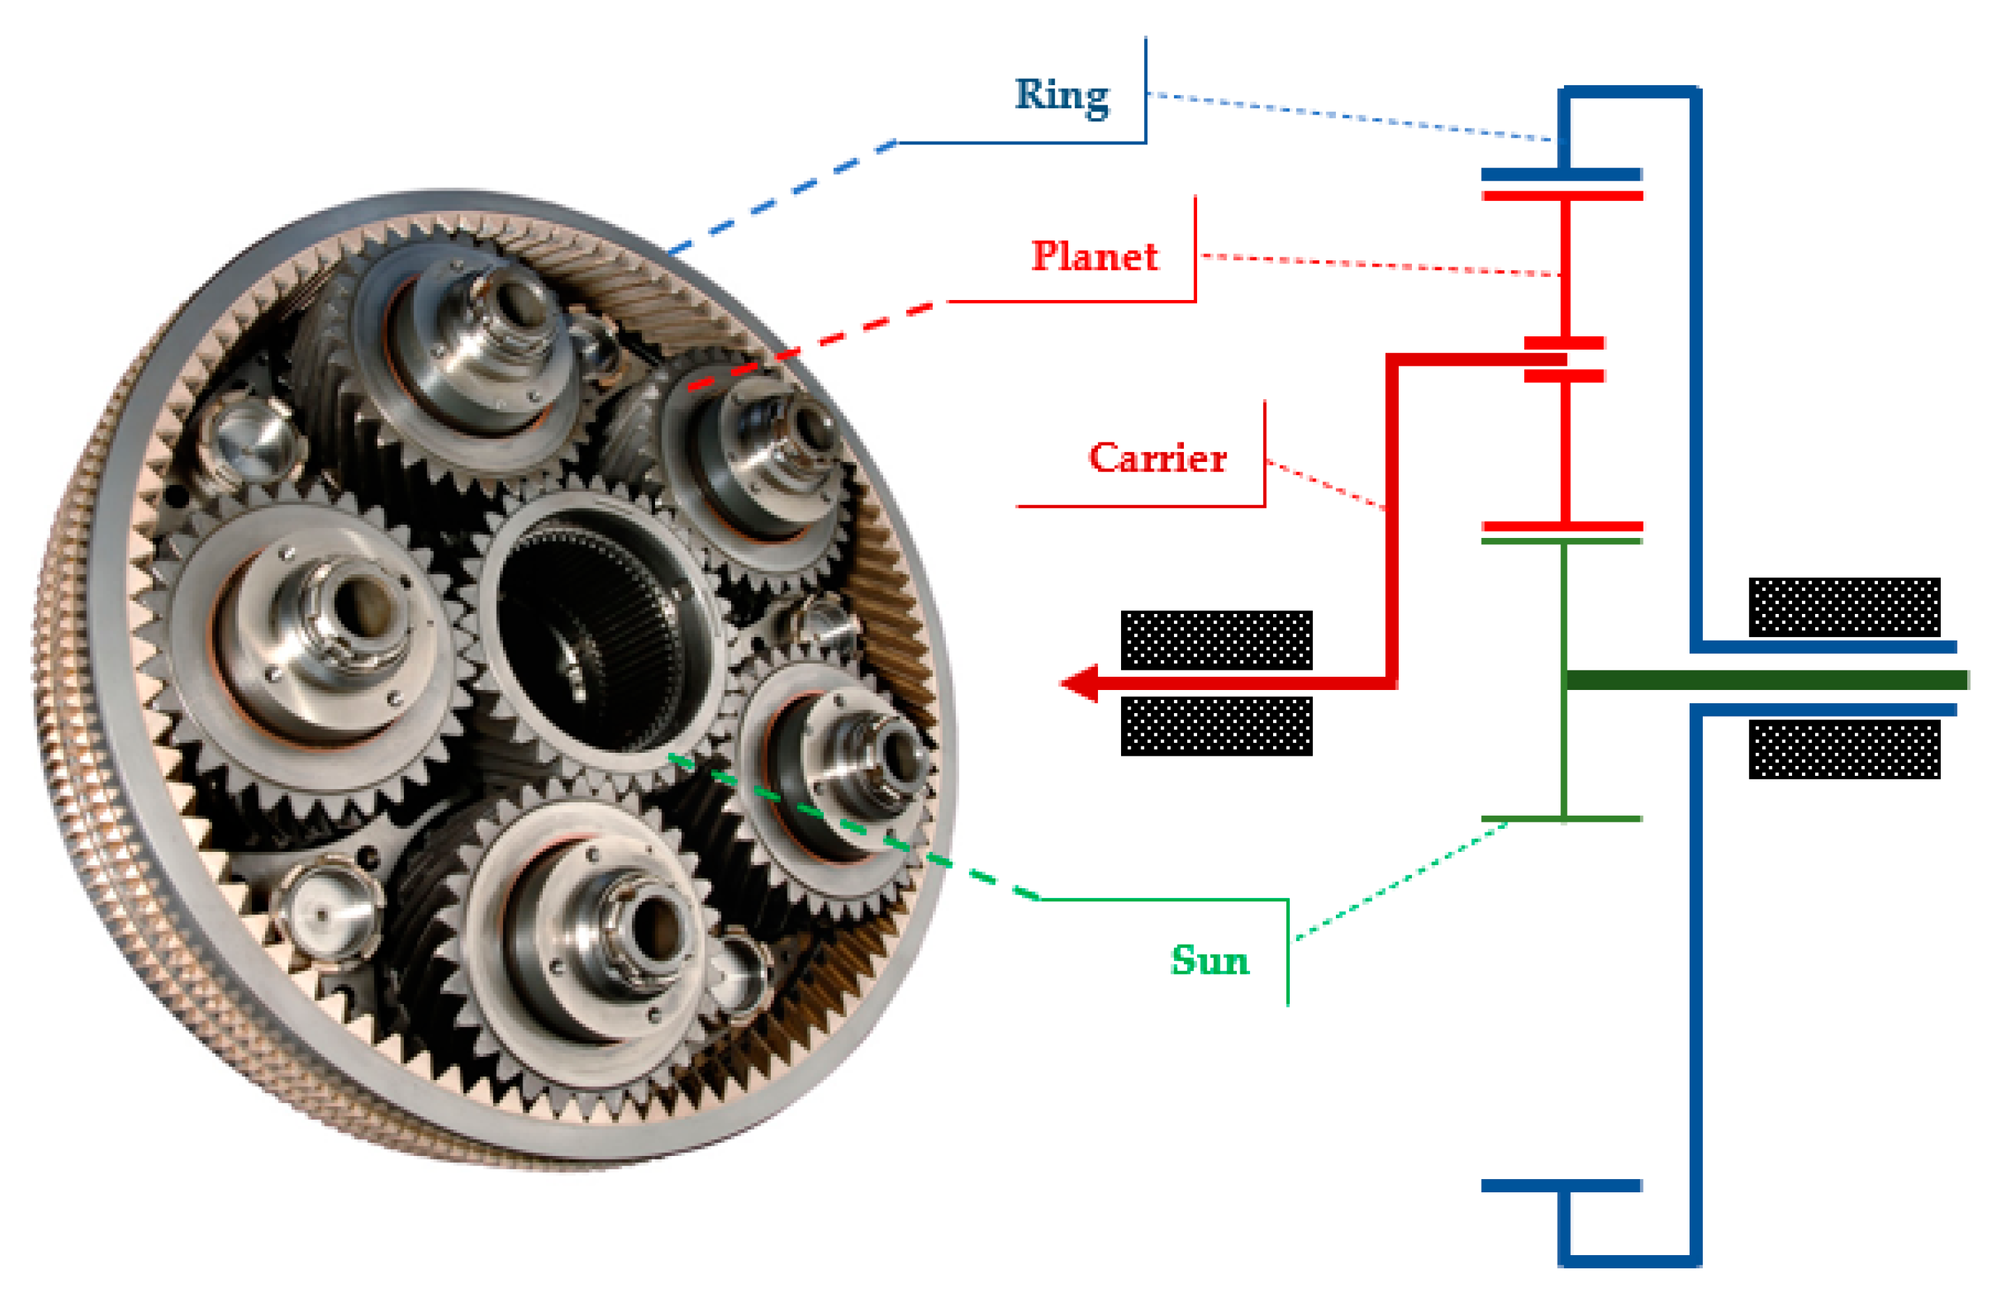 A few notes on planetary gear sets